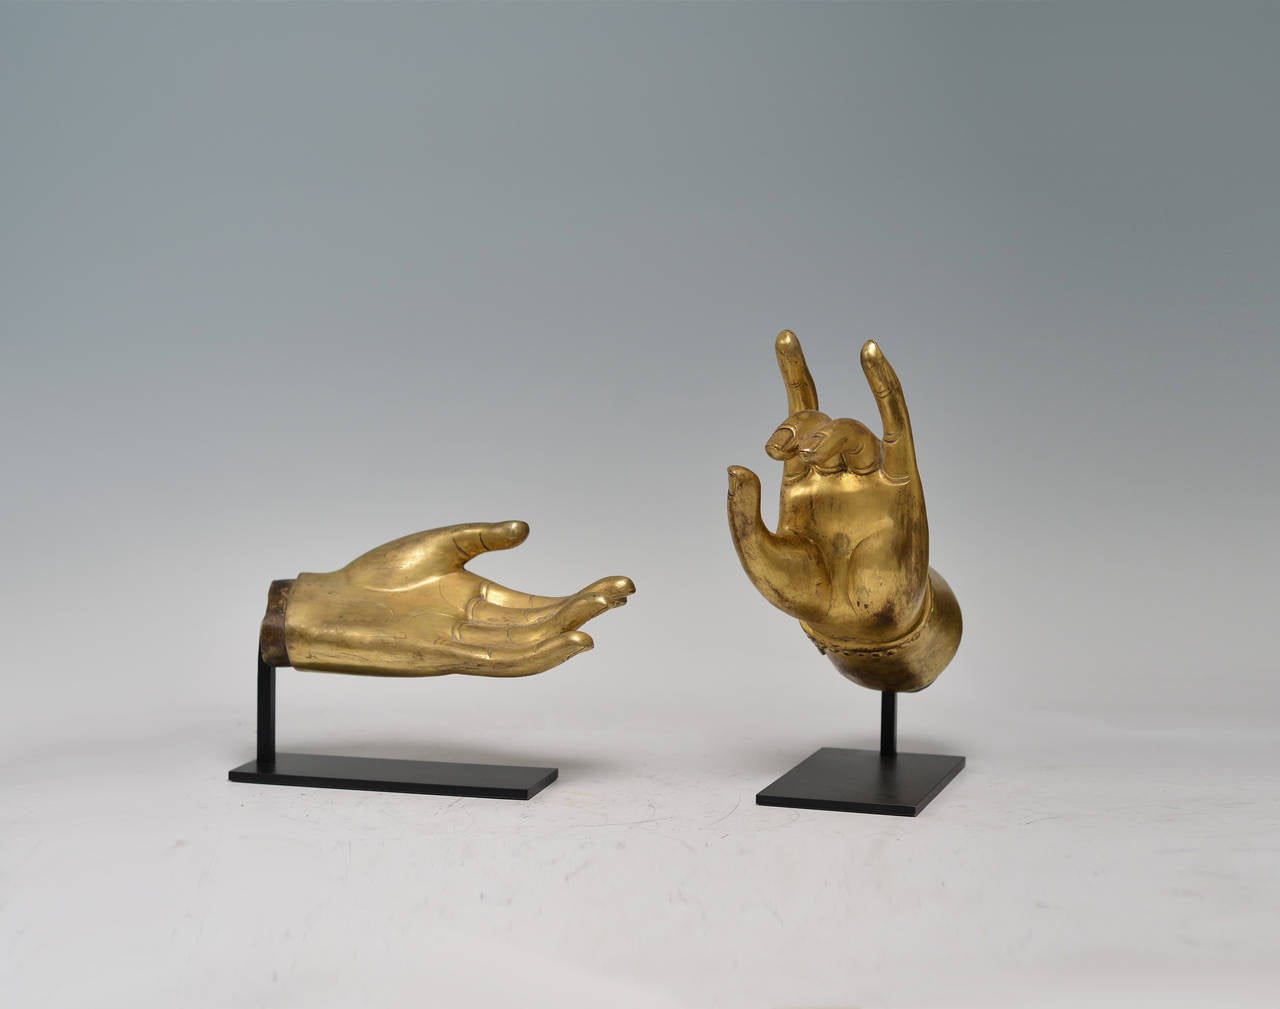 Fine cast gilt bronze Buddha hands from Tibet, left hand in giving mudra and right hand in teaching mudra.
Dimension: 10.5